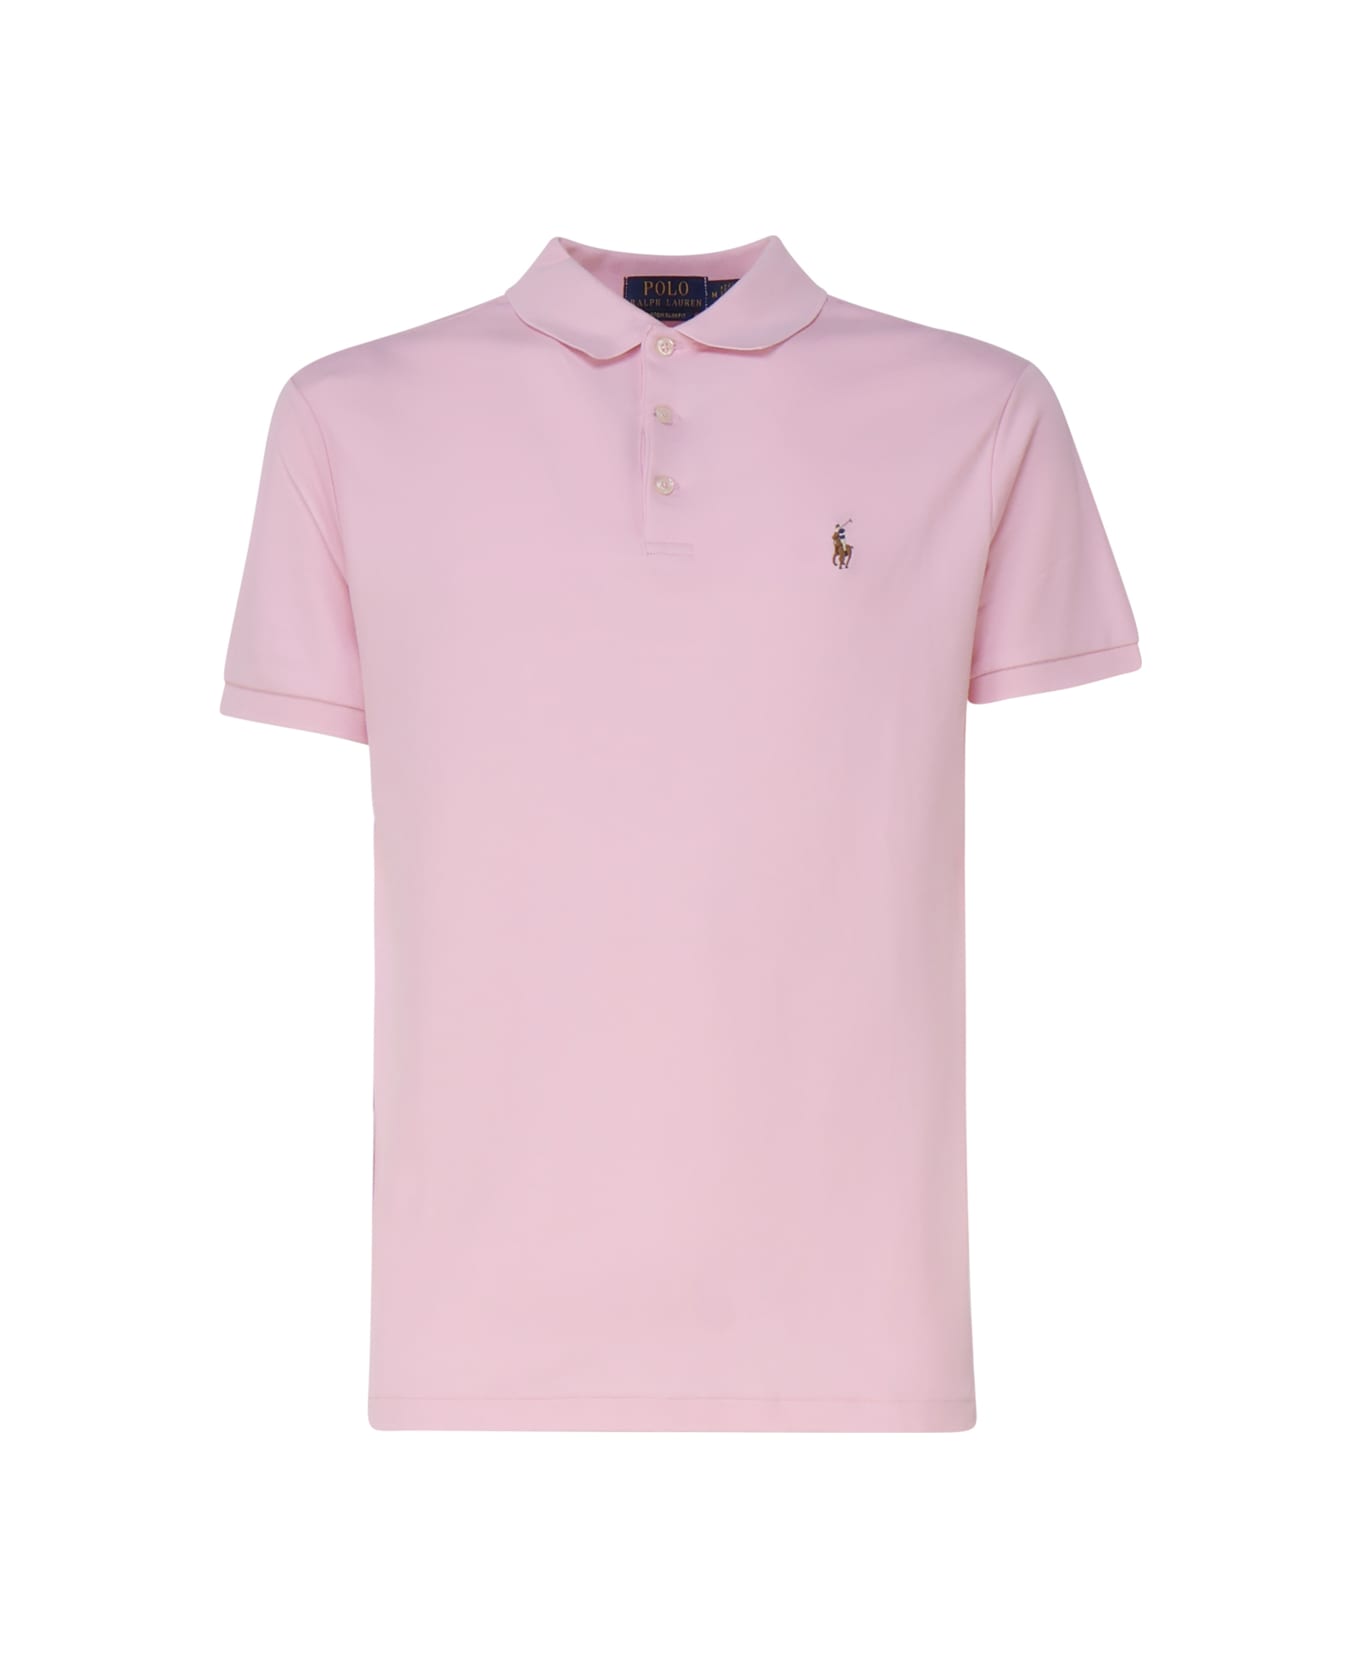 Polo Ralph Lauren Polo Shirt With Embroidery - Pink ポロシャツ